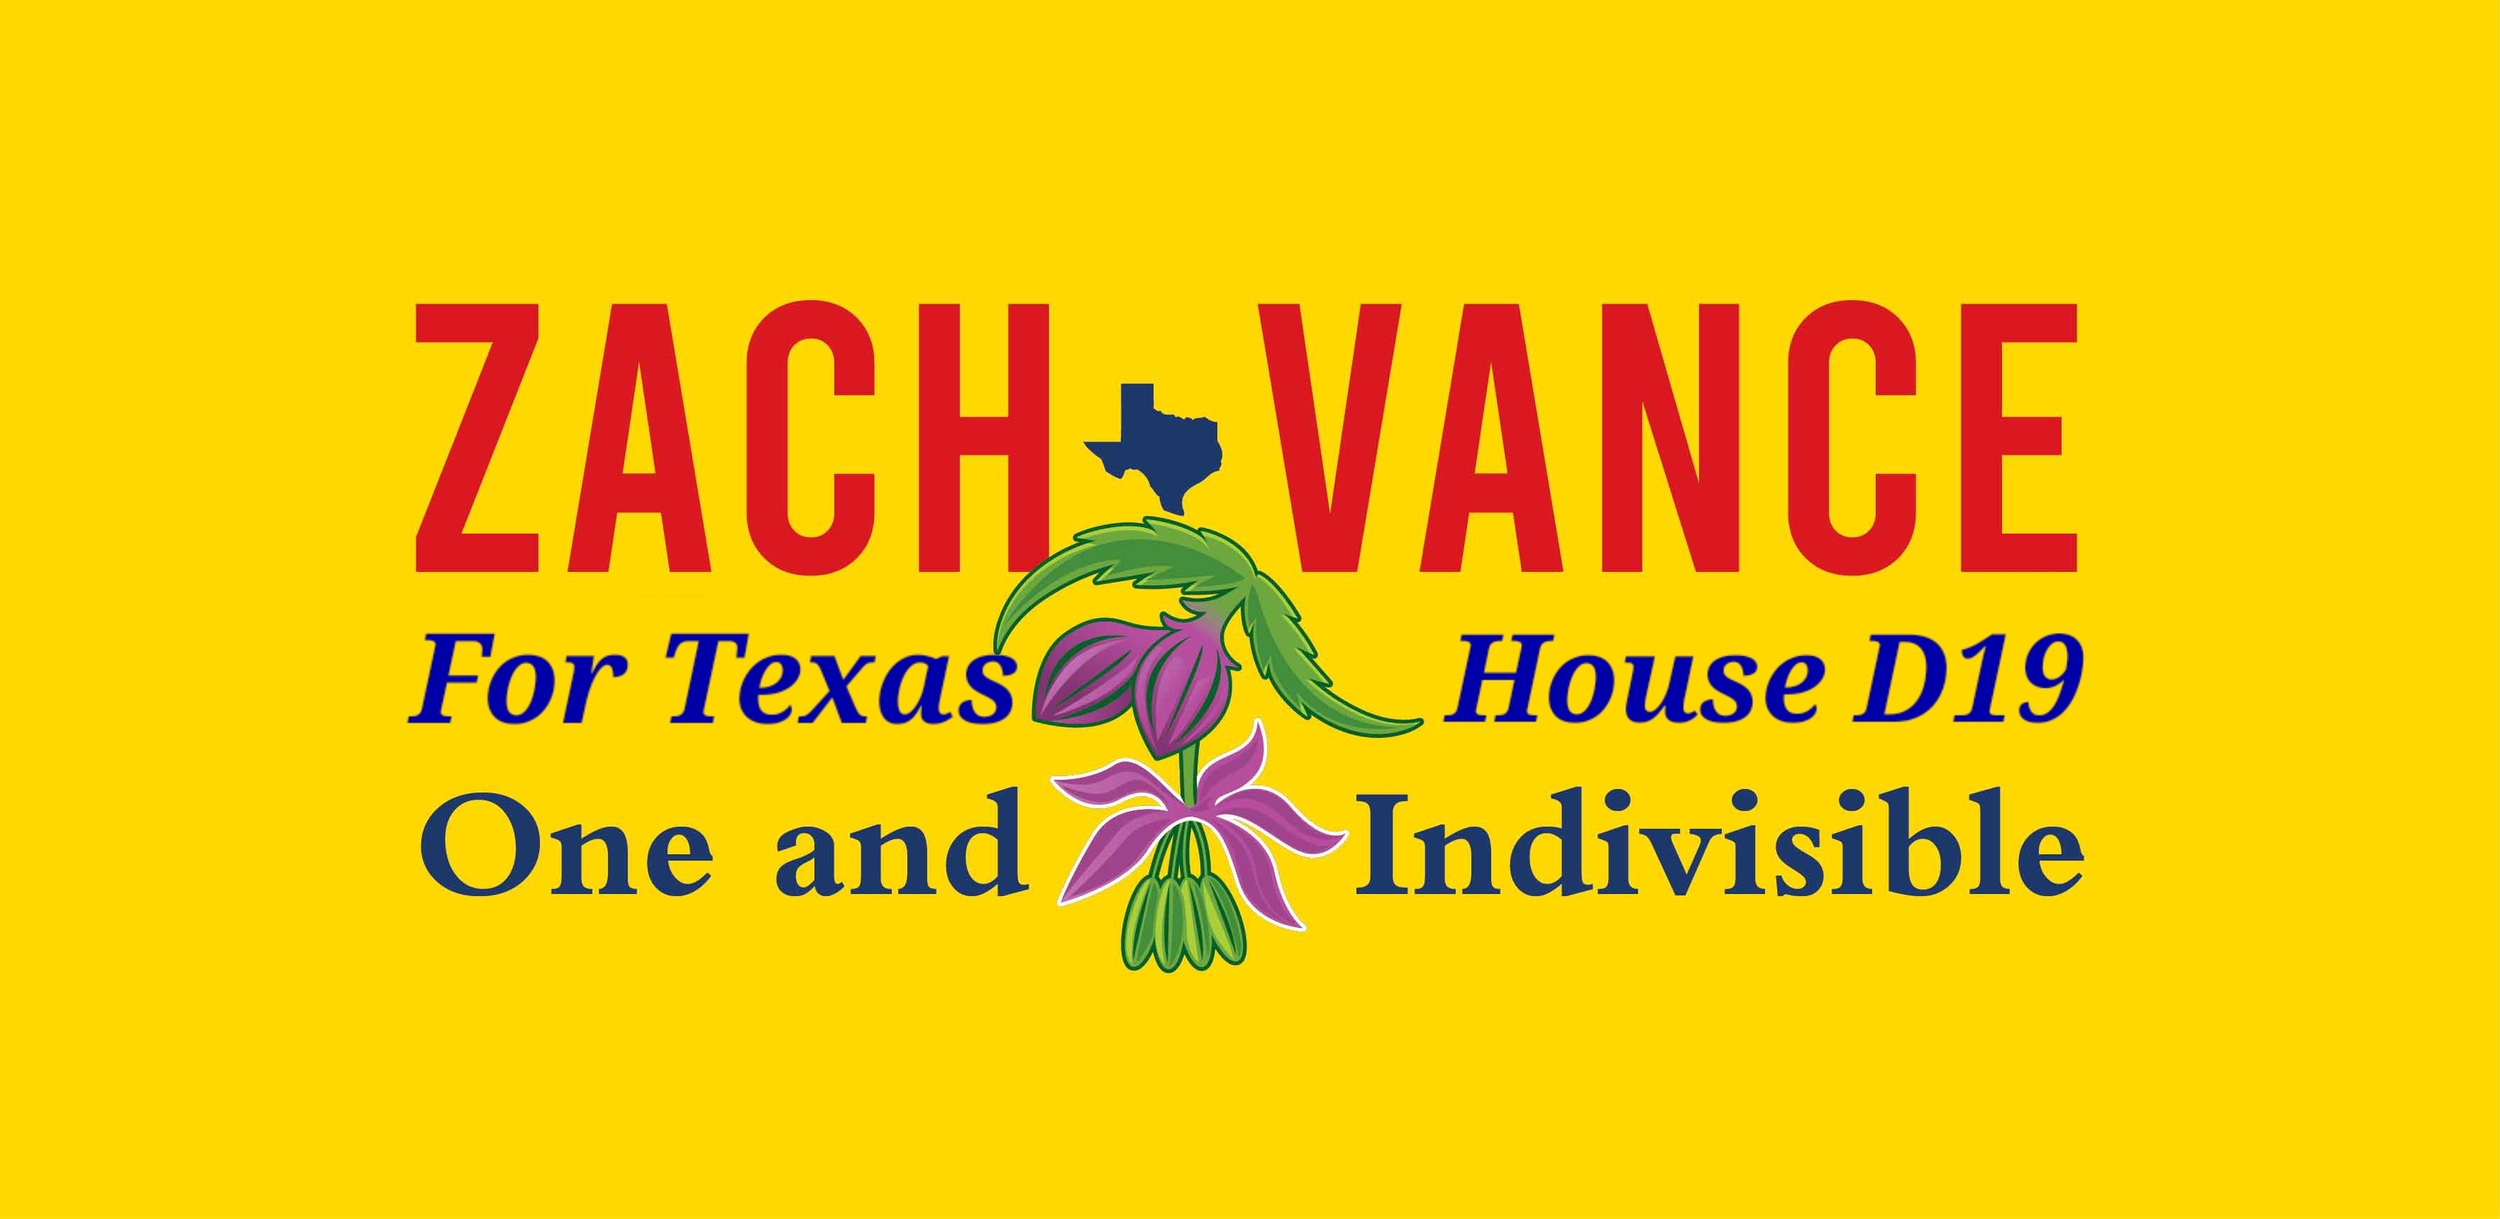 Zach Vance for Texas House District 19